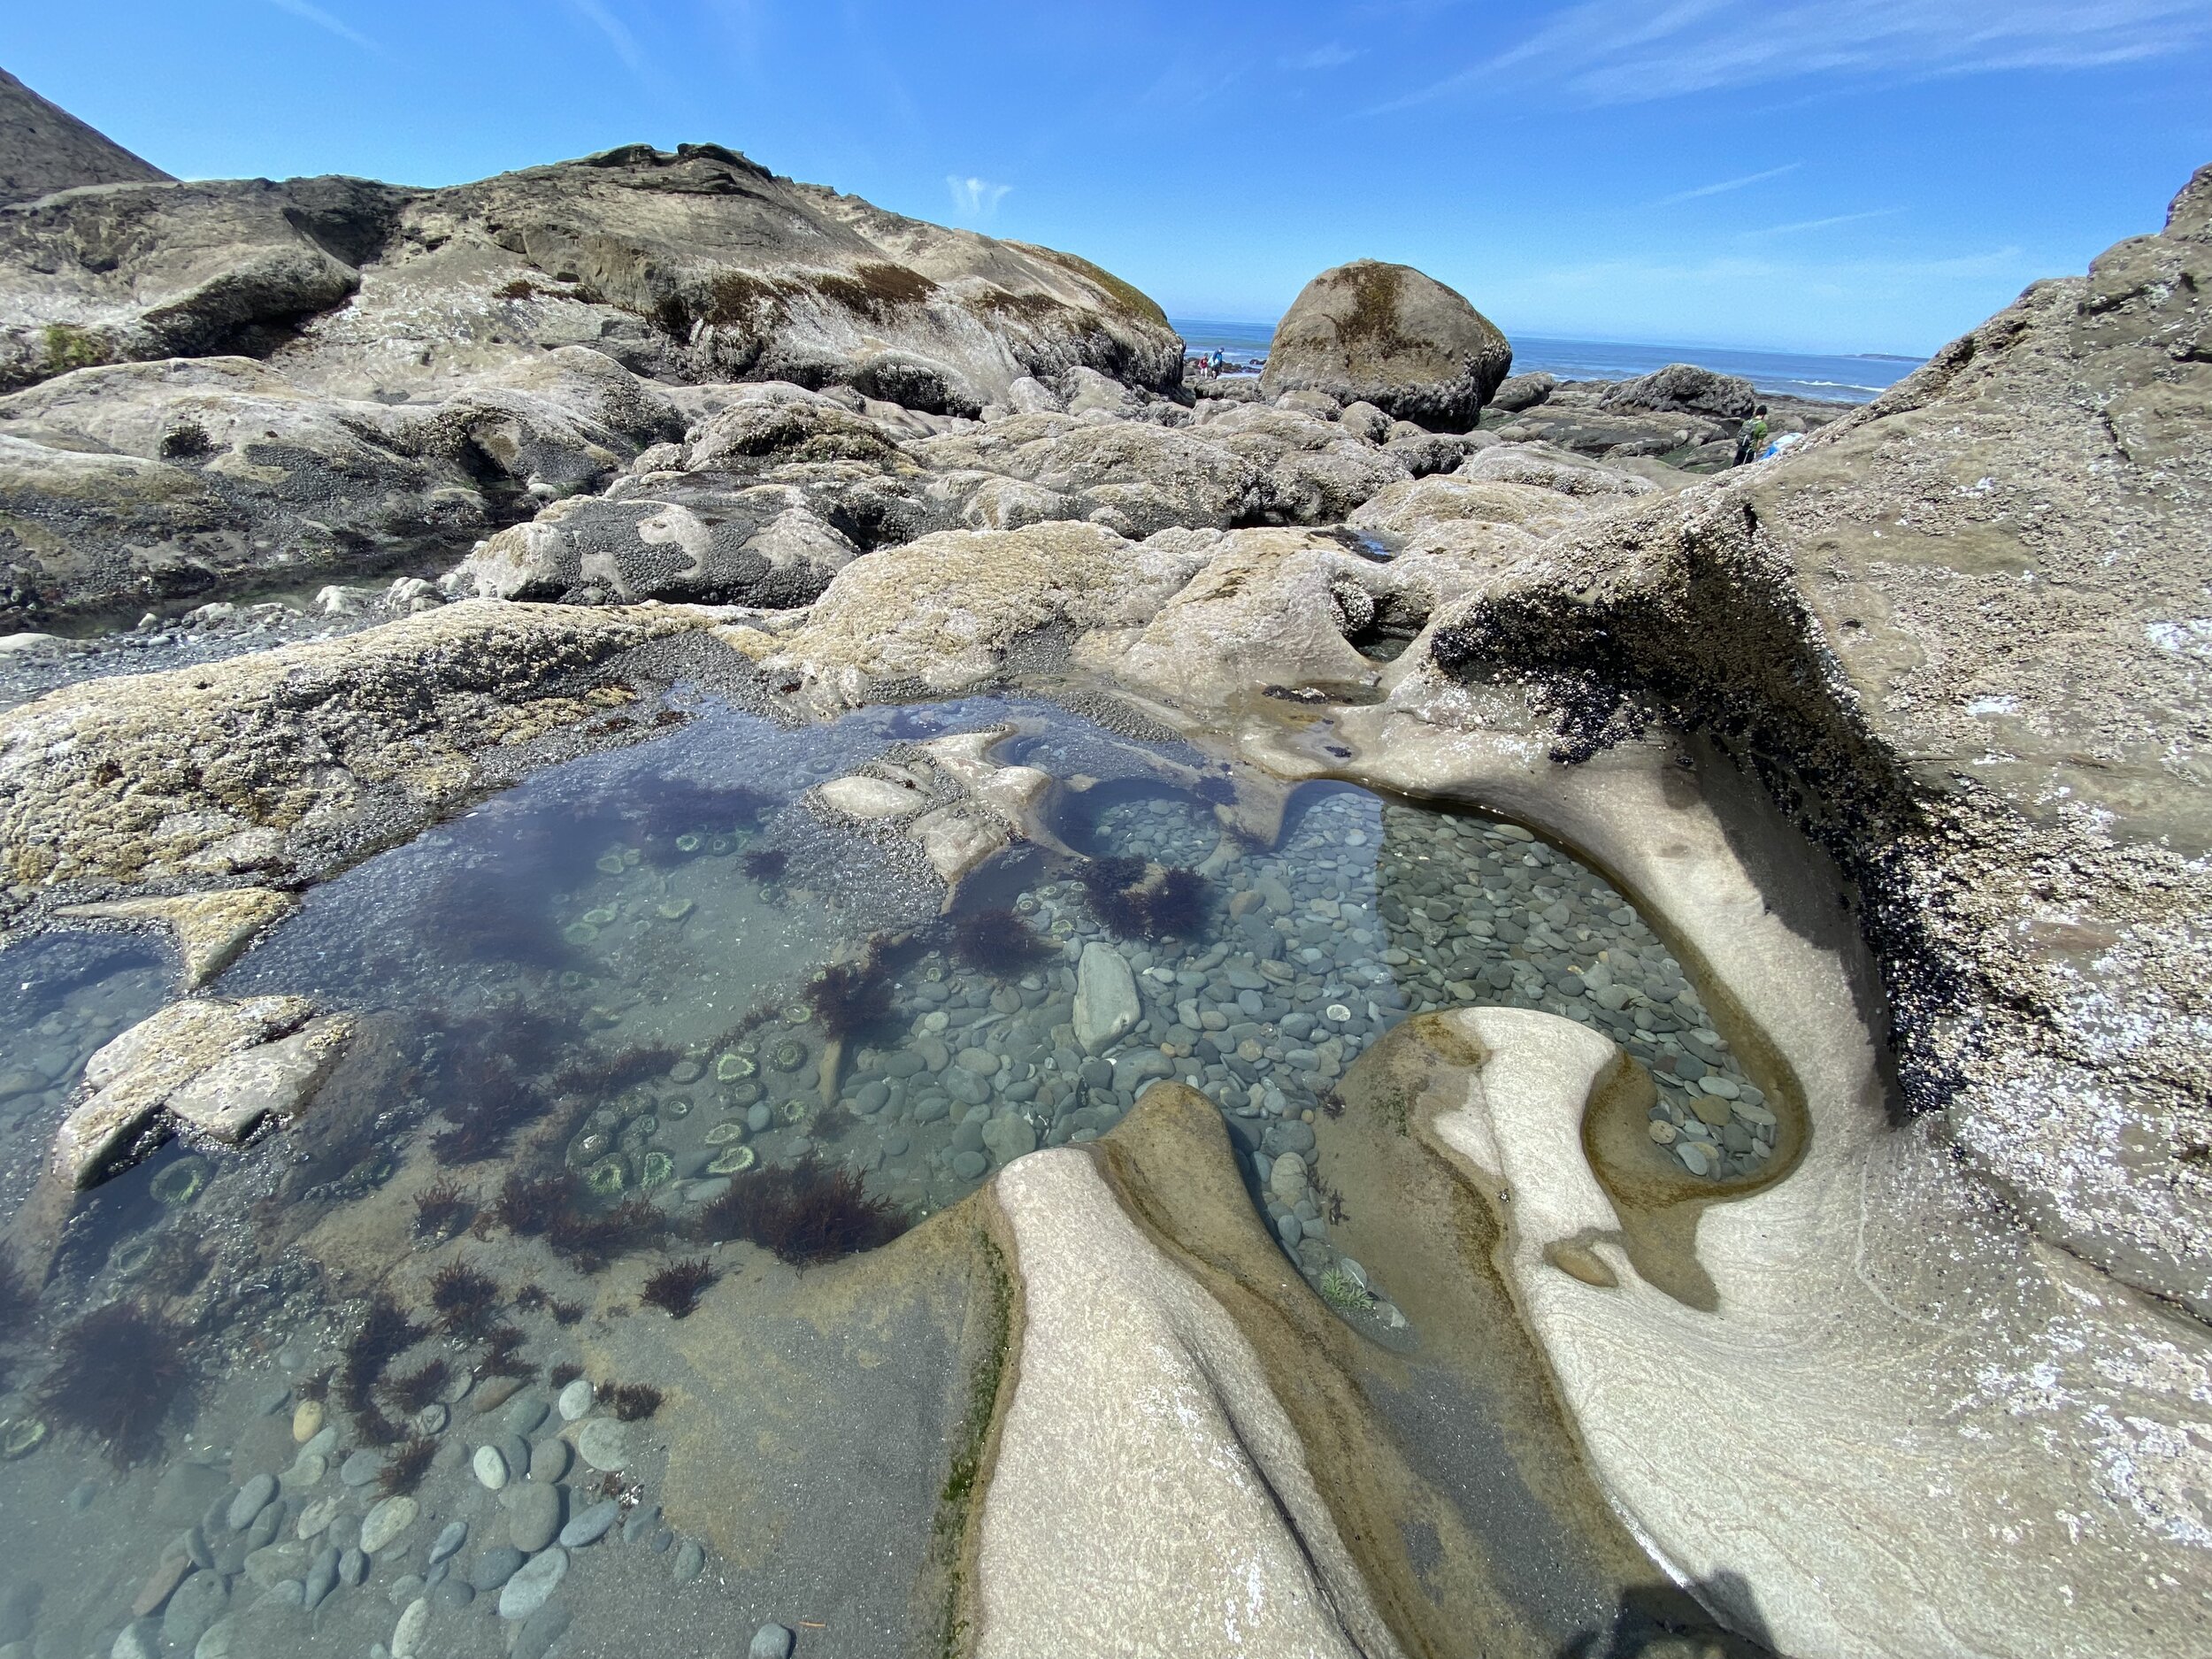 Not just in the sand, some tide pools are left up in the rocks too